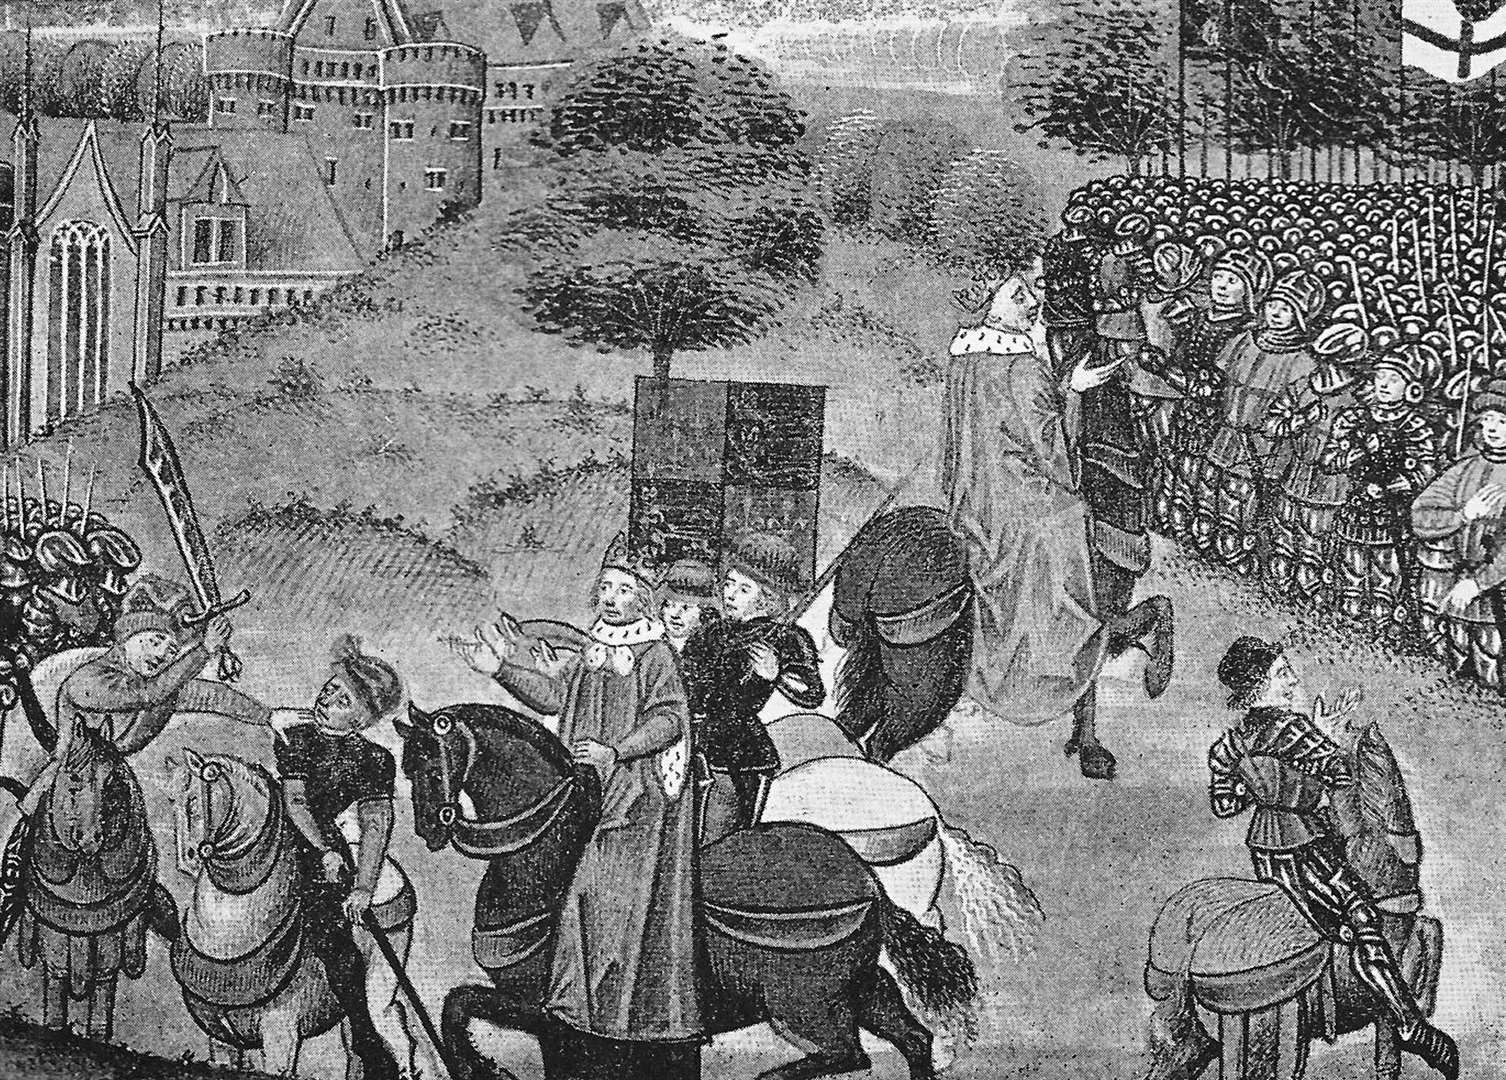 The death of Wat Tyler, who led the Peasants' Revolt is pictured